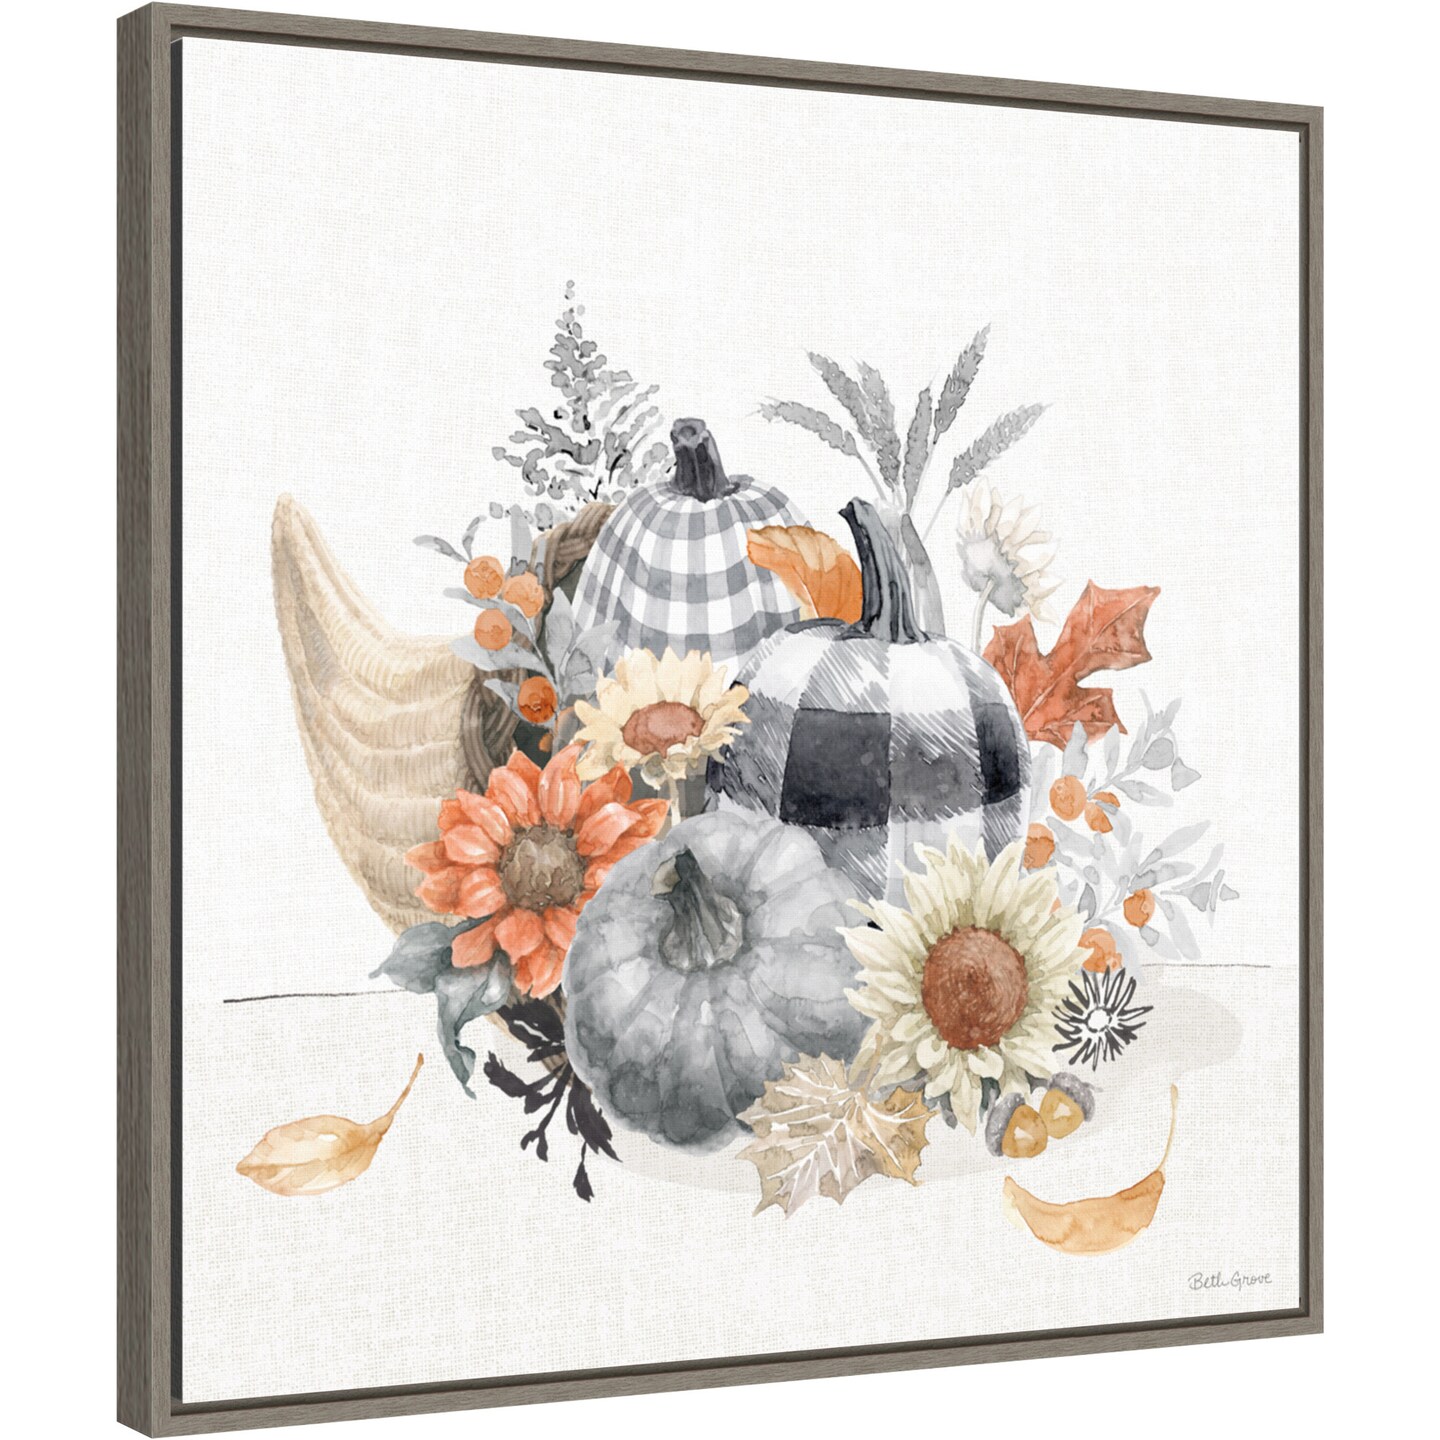 Harvest Classics VIII by Beth Grove 22-in. W x 22-in. H. Canvas Wall Art Print Framed in Grey